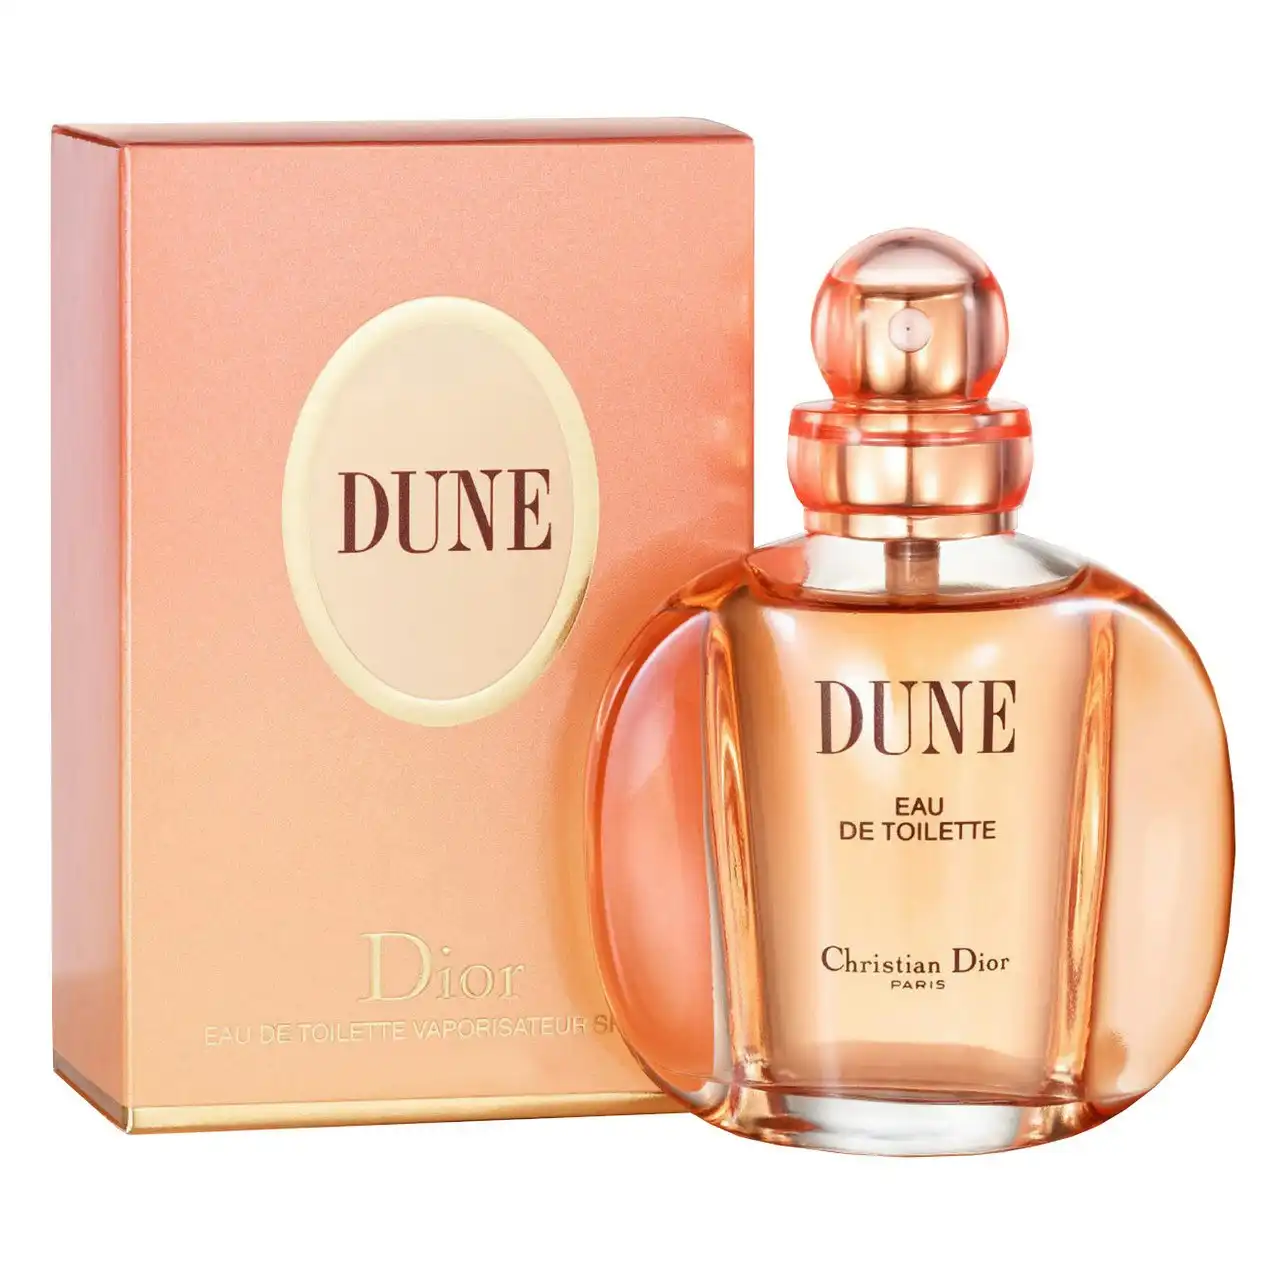 Dune 100ml EDT By Christian Dior (Womens)